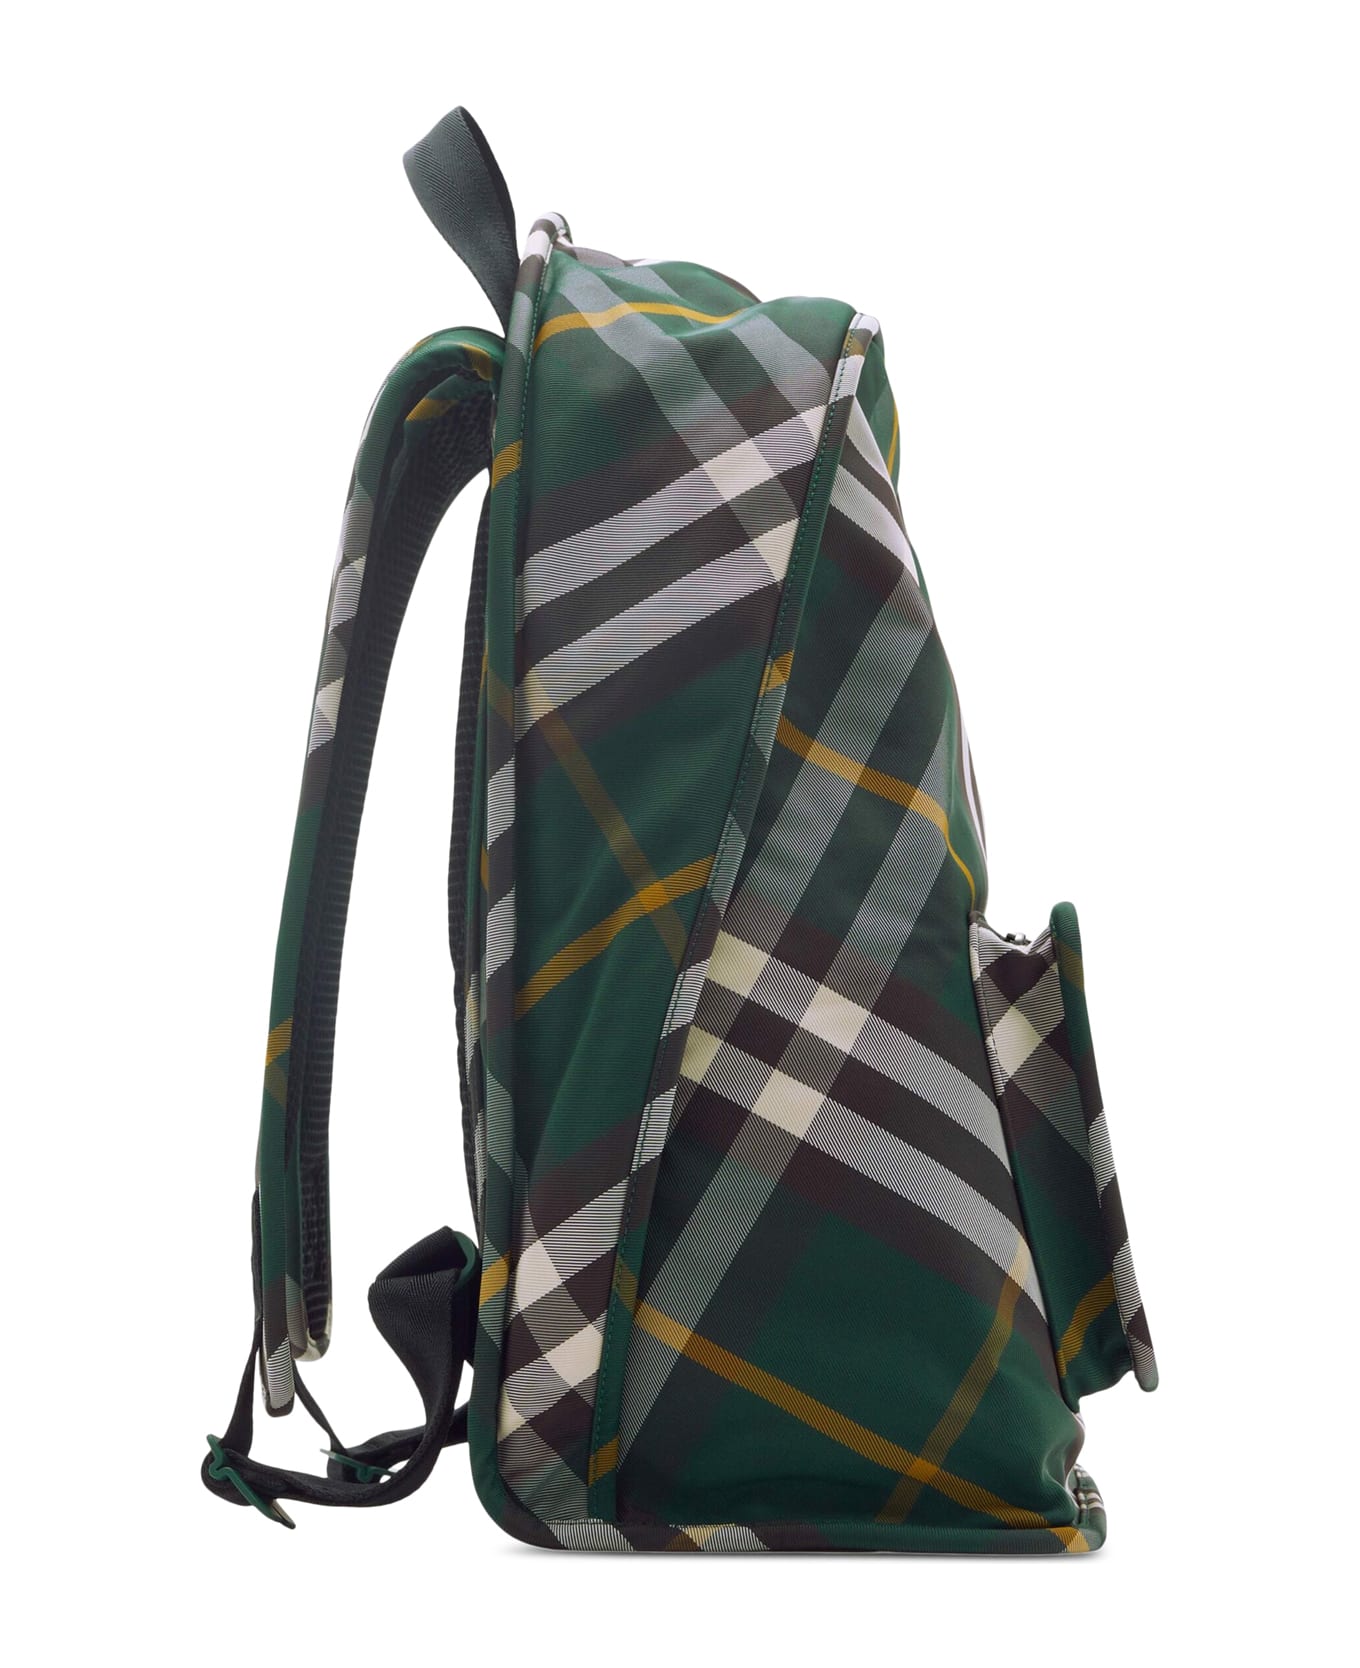 Burberry Ml Shield Backpack S21 Men`s Bags - Ivy